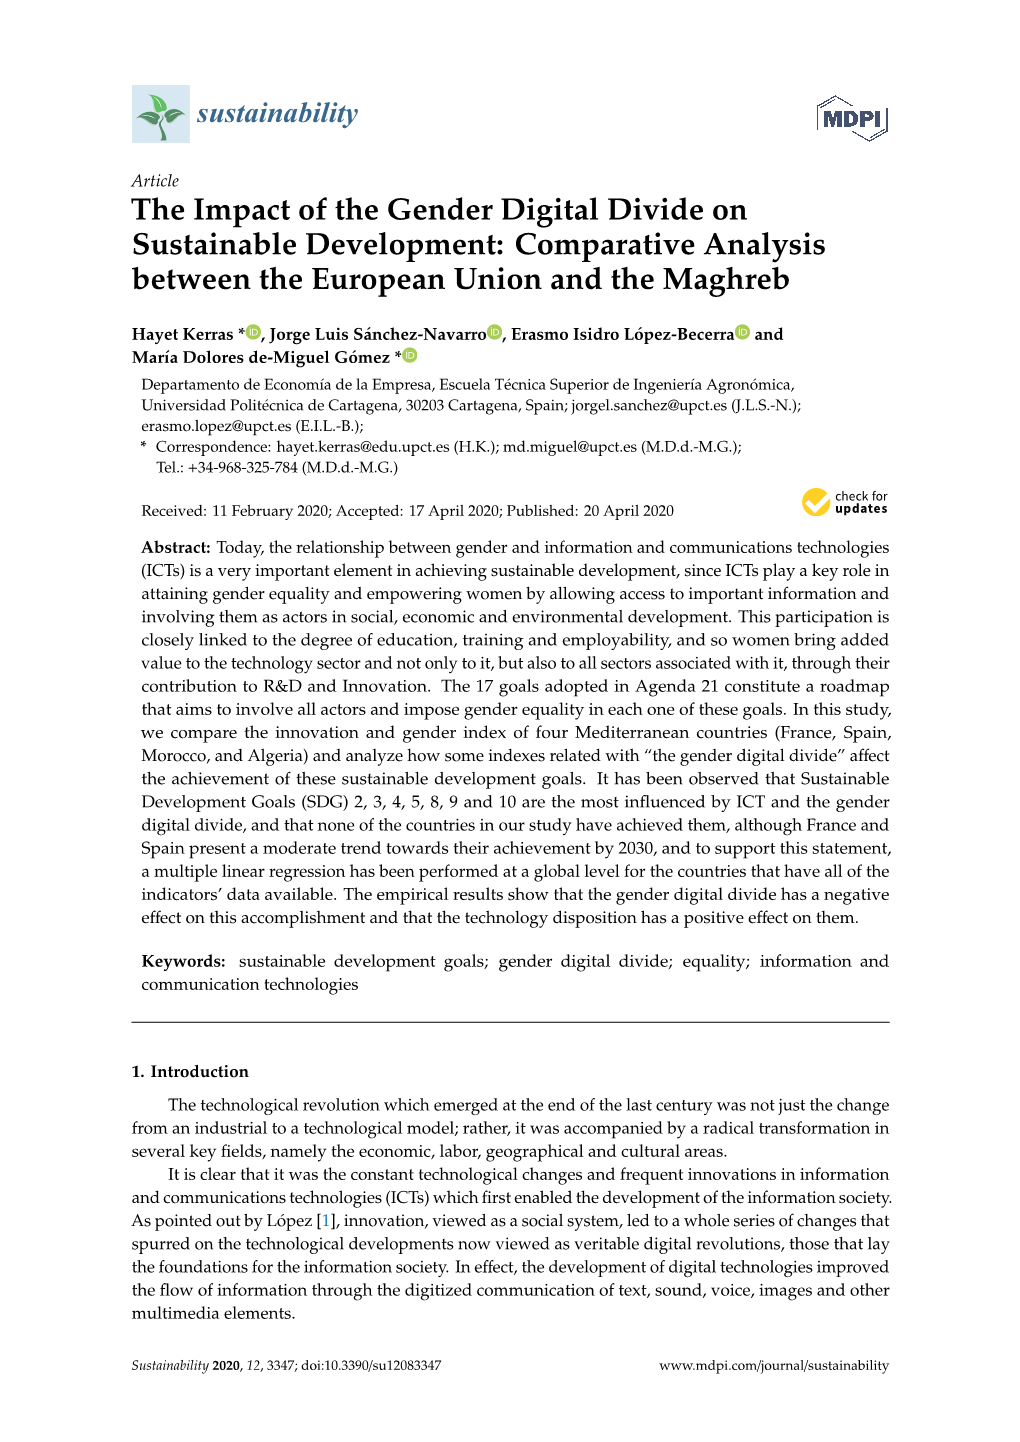 The Impact of the Gender Digital Divide on Sustainable Development: Comparative Analysis Between the European Union and the Maghreb